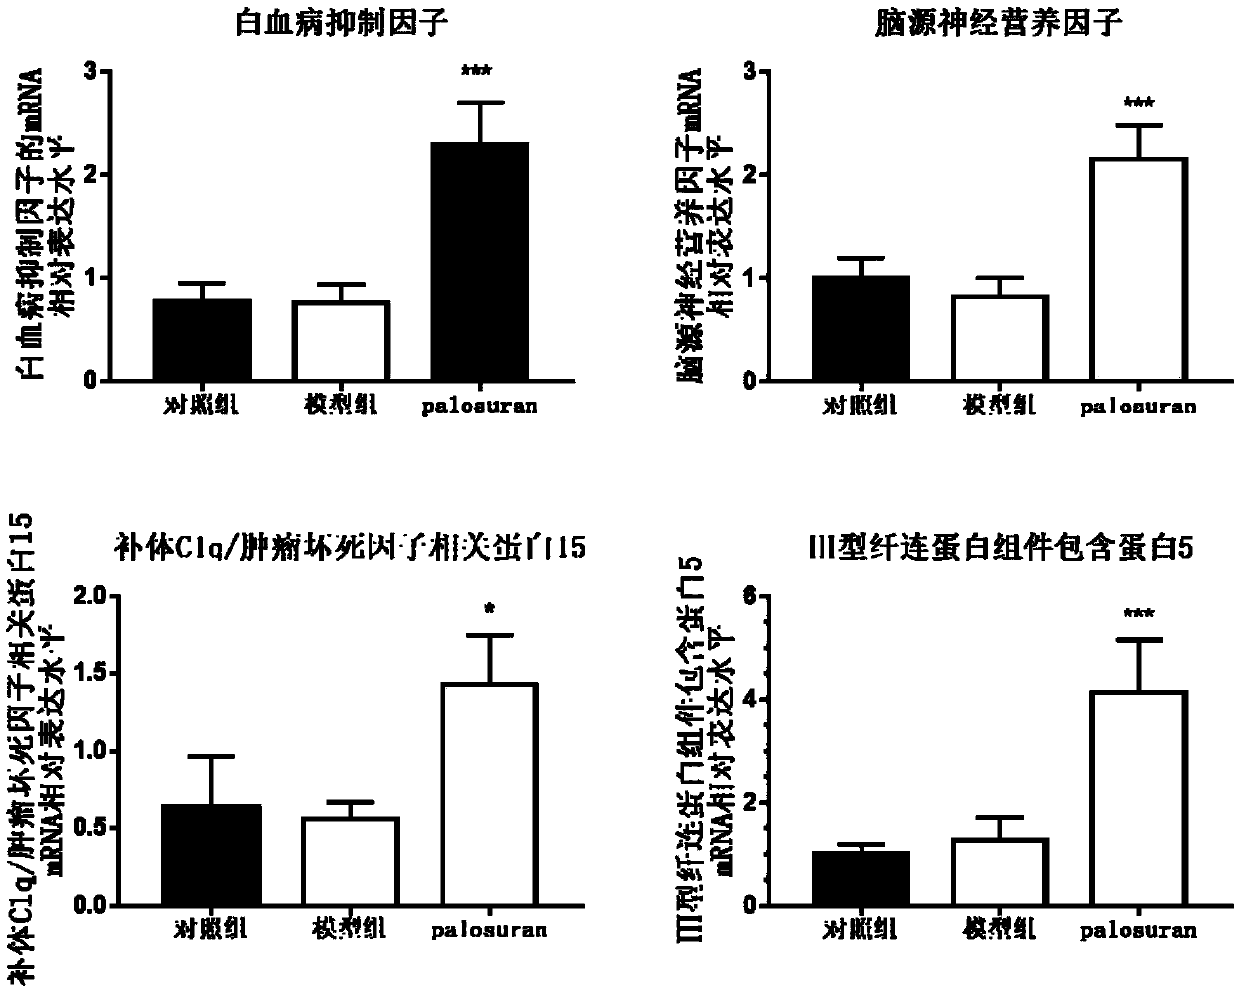 Application of compound palosuran to prevention and treatment of diseases of skeletal muscle atrophy